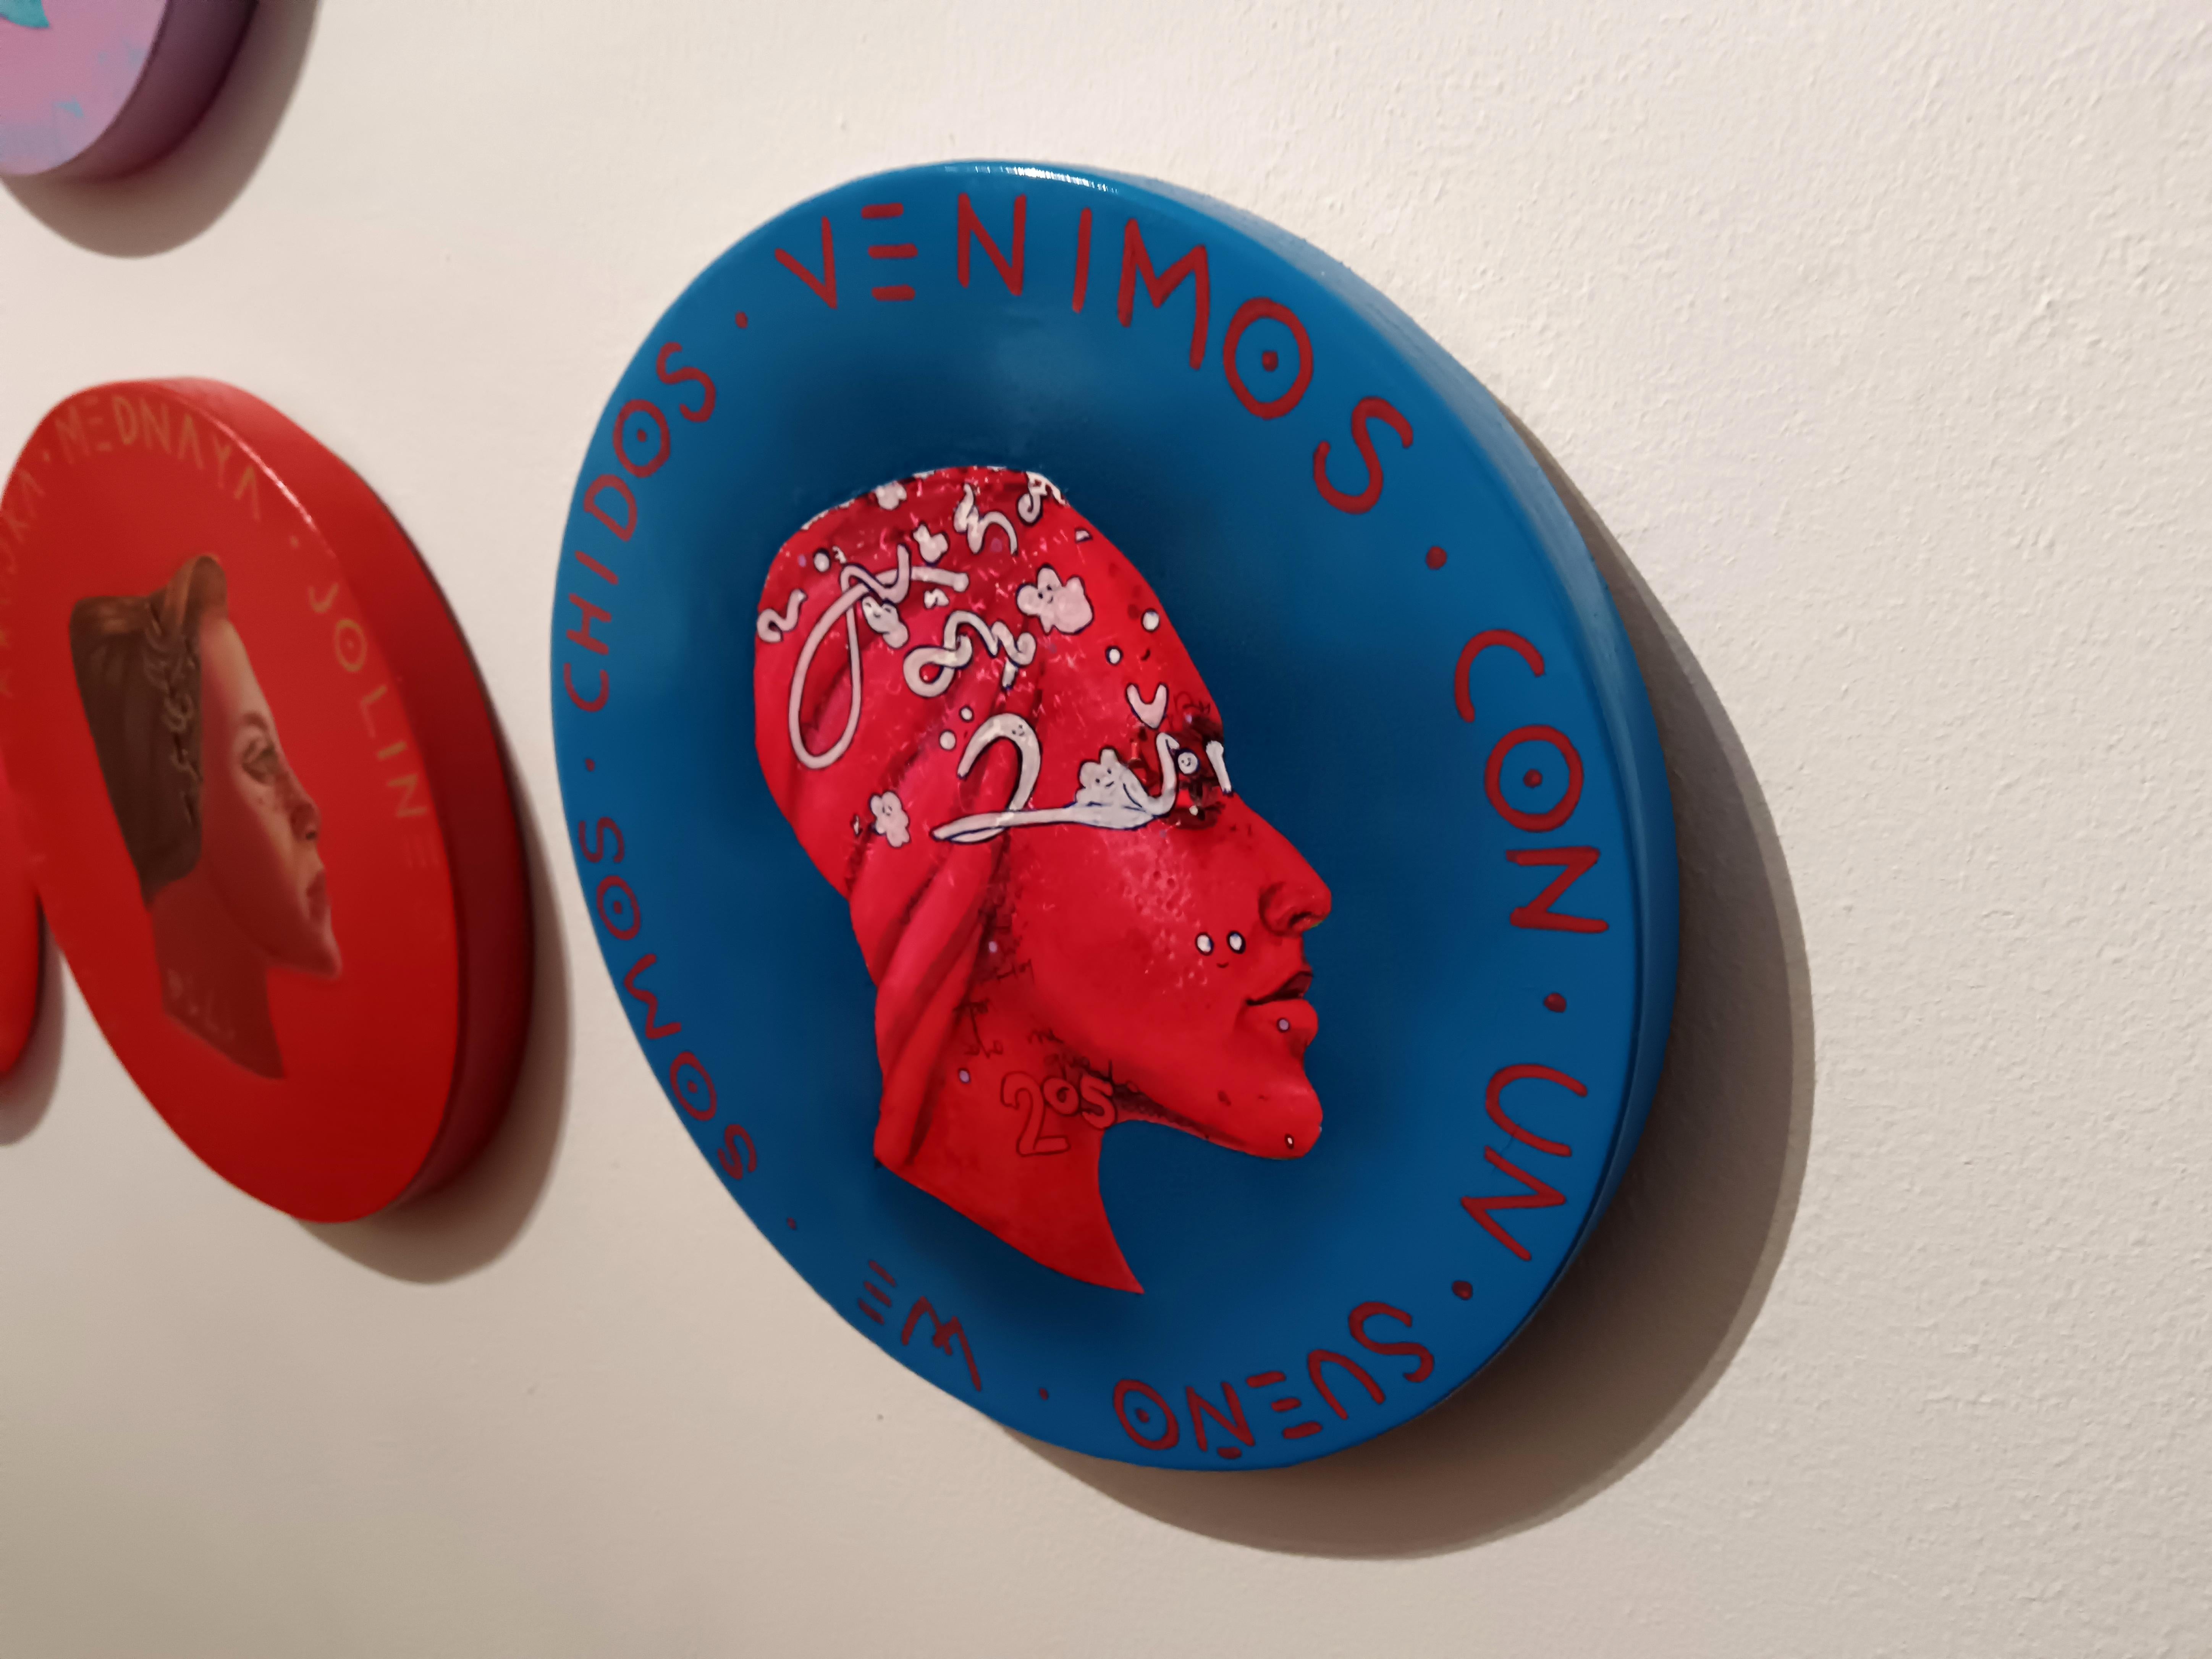 Red Fluor Side Profile Female Portrait. Mexican Latin Blue Coin 